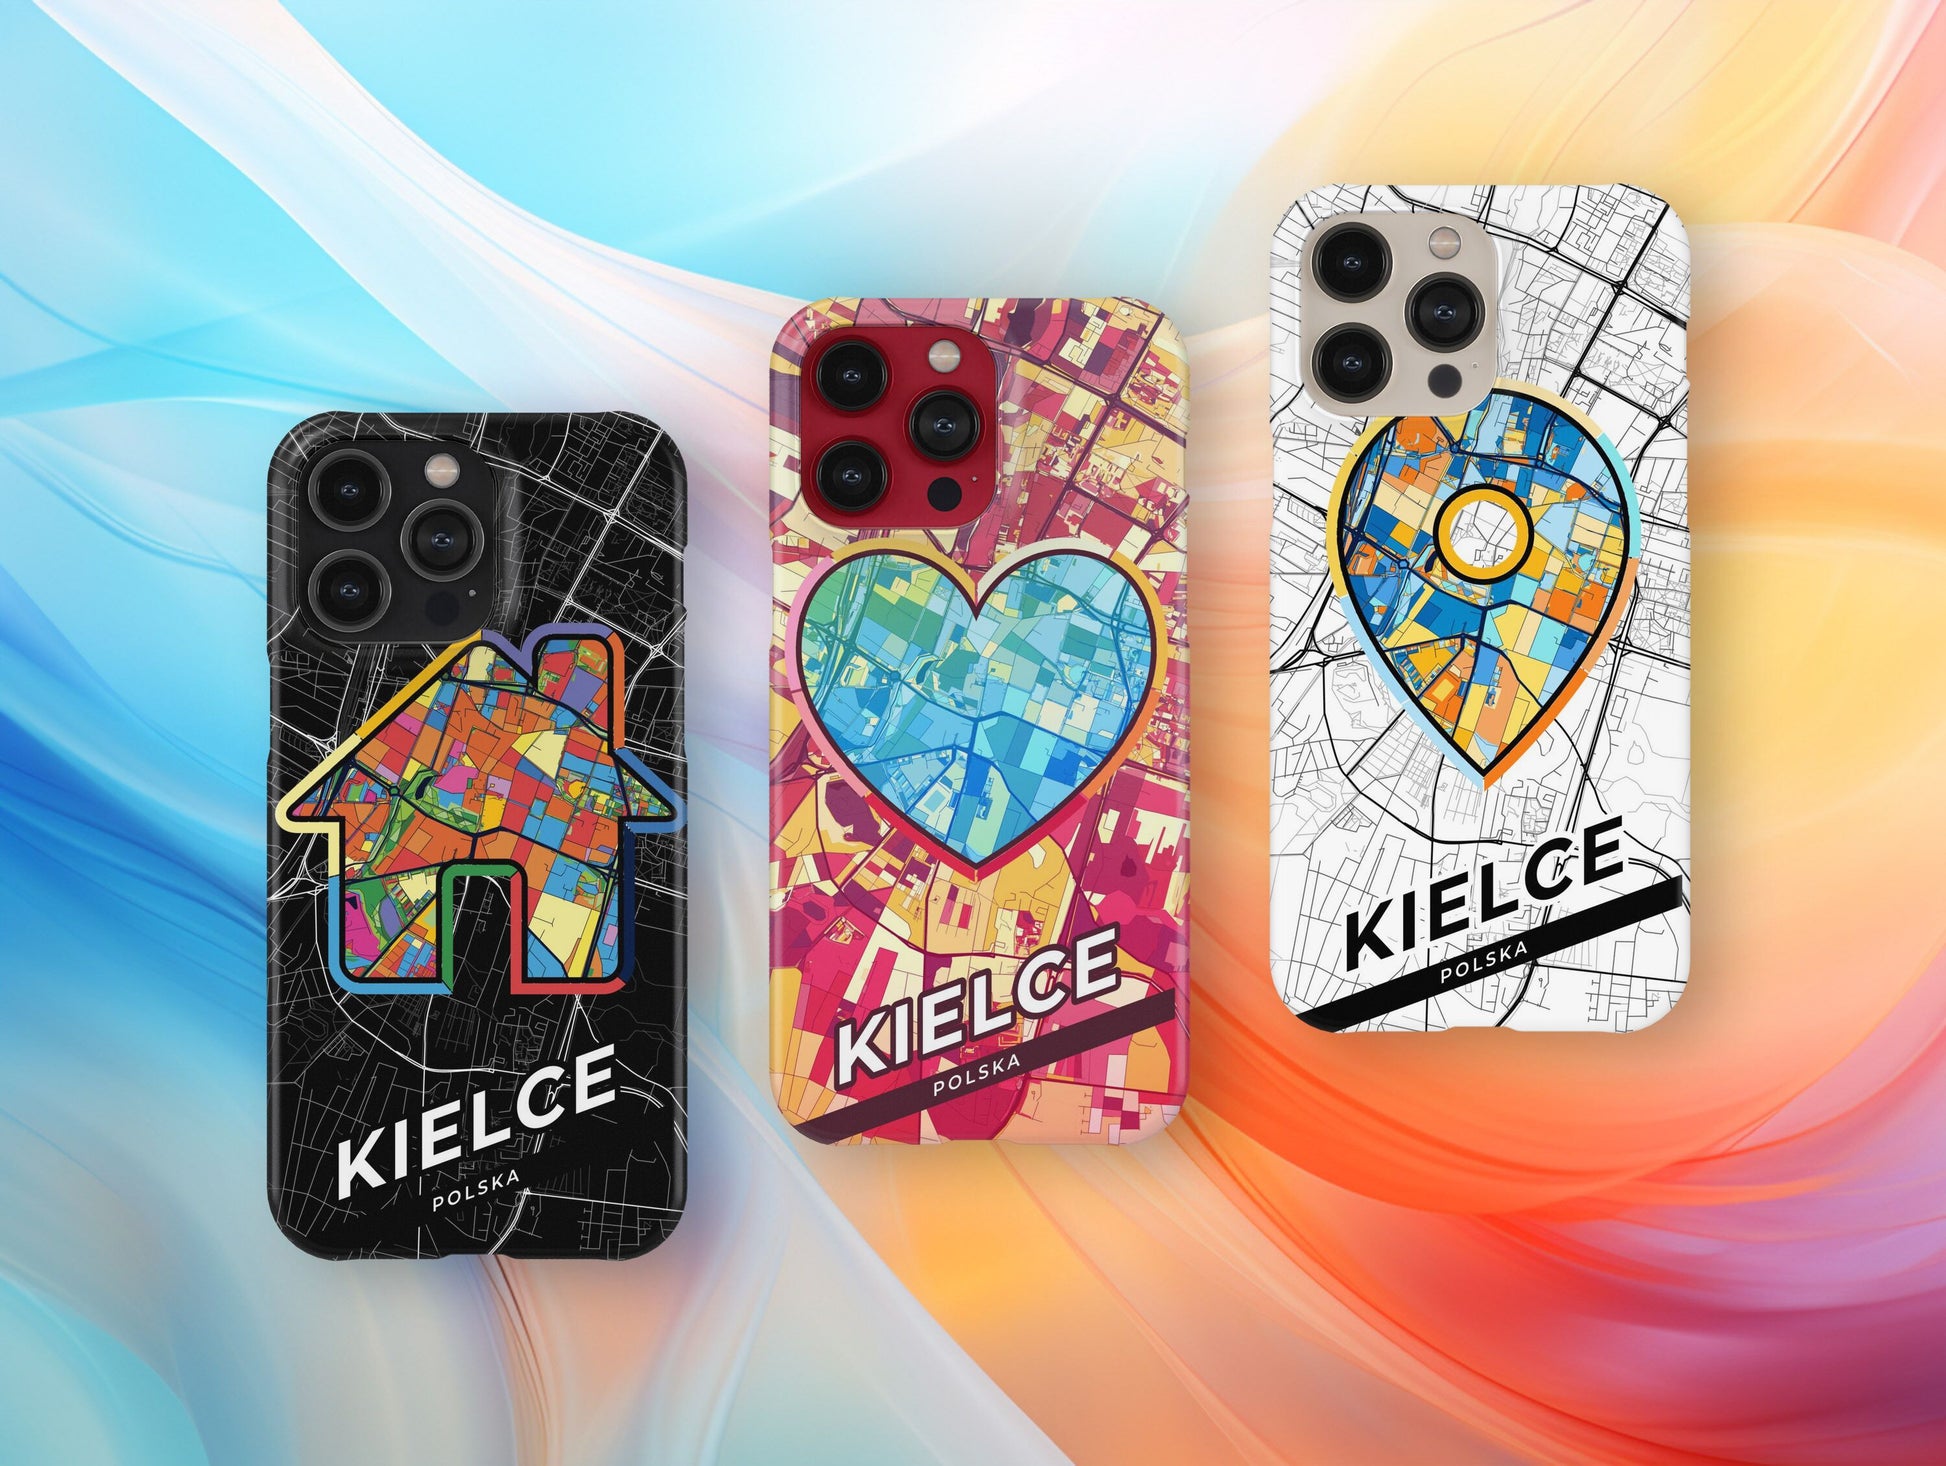 Kielce Poland slim phone case with colorful icon. Birthday, wedding or housewarming gift. Couple match cases.